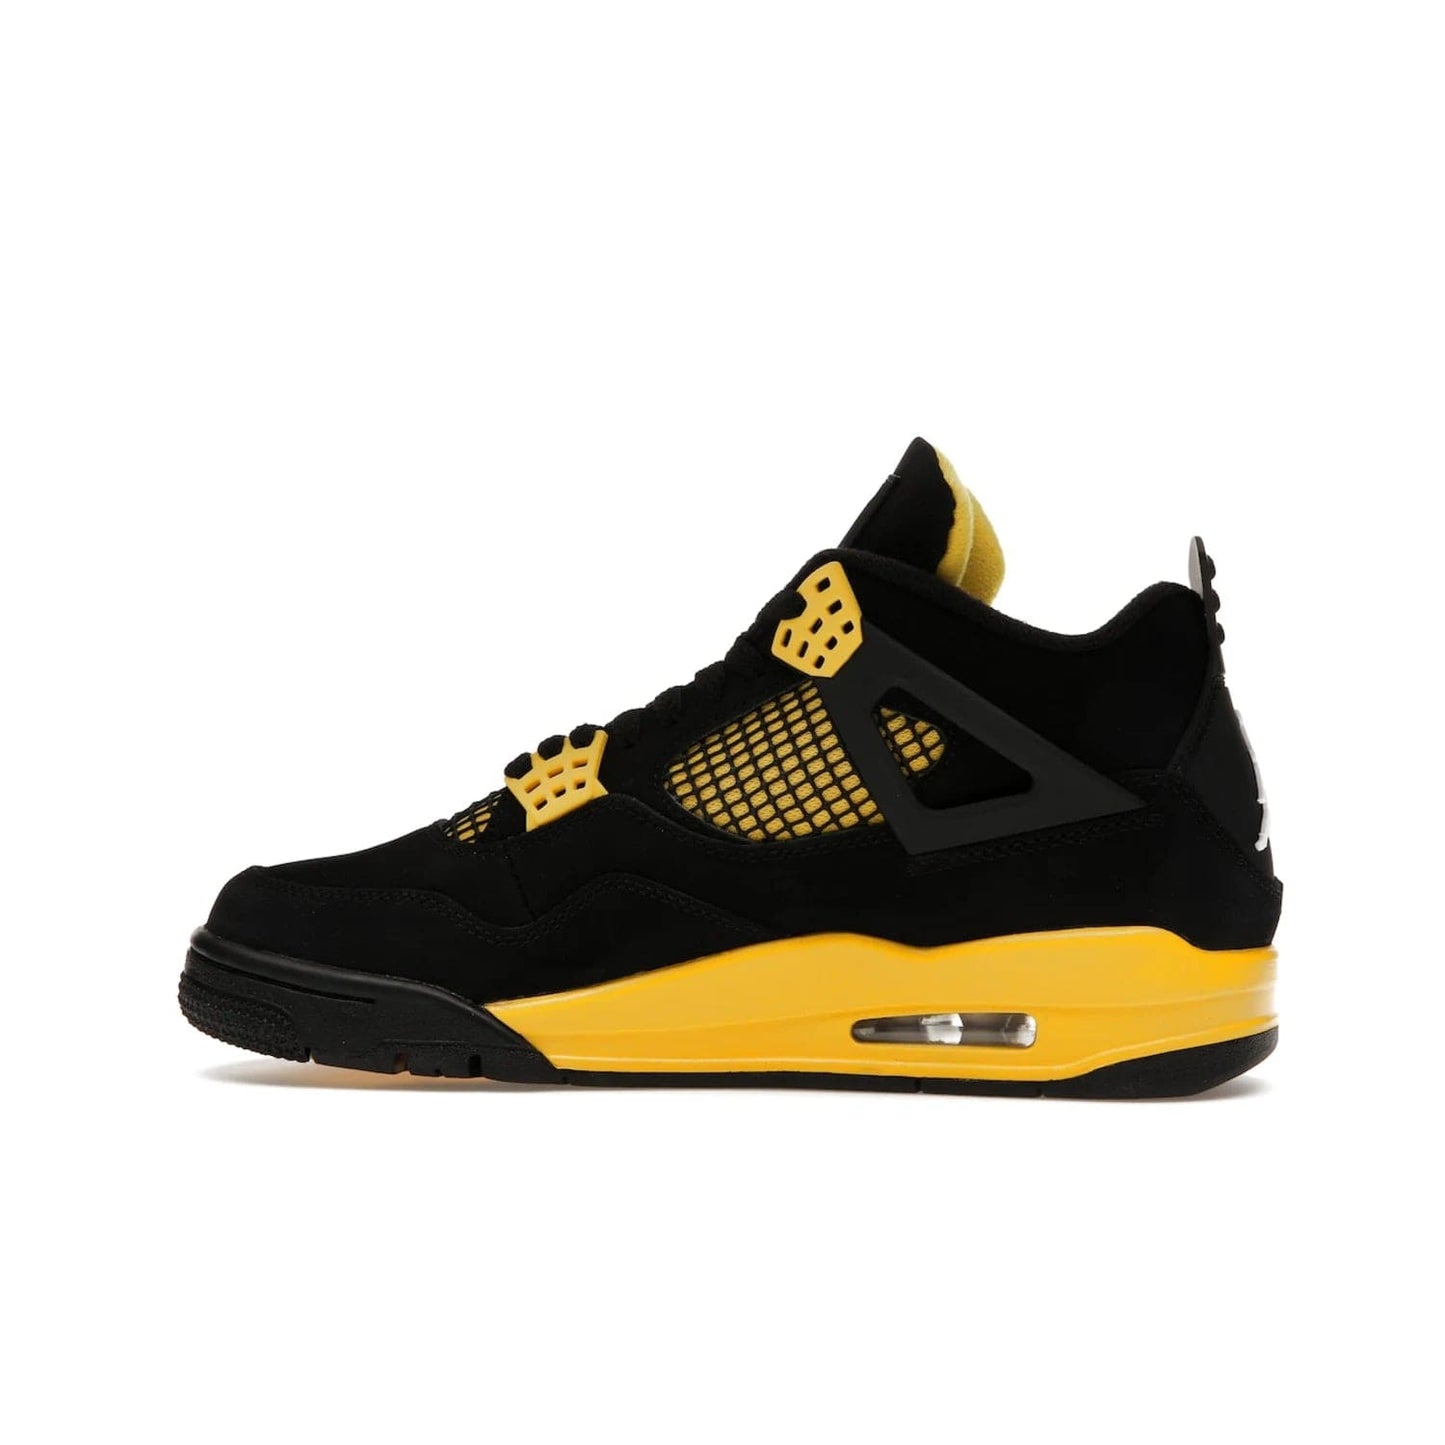 Jordan 4 Retro Thunder (2023) - Image 20 - Only at www.BallersClubKickz.com - Iconic Air Jordan 4 Retro Thunder (2023) returns with black nubuck upper and Tour Yellow details. Featuring Jumpman logo on heel tab, tongue and insoles. Dropping May 13th, 2023.